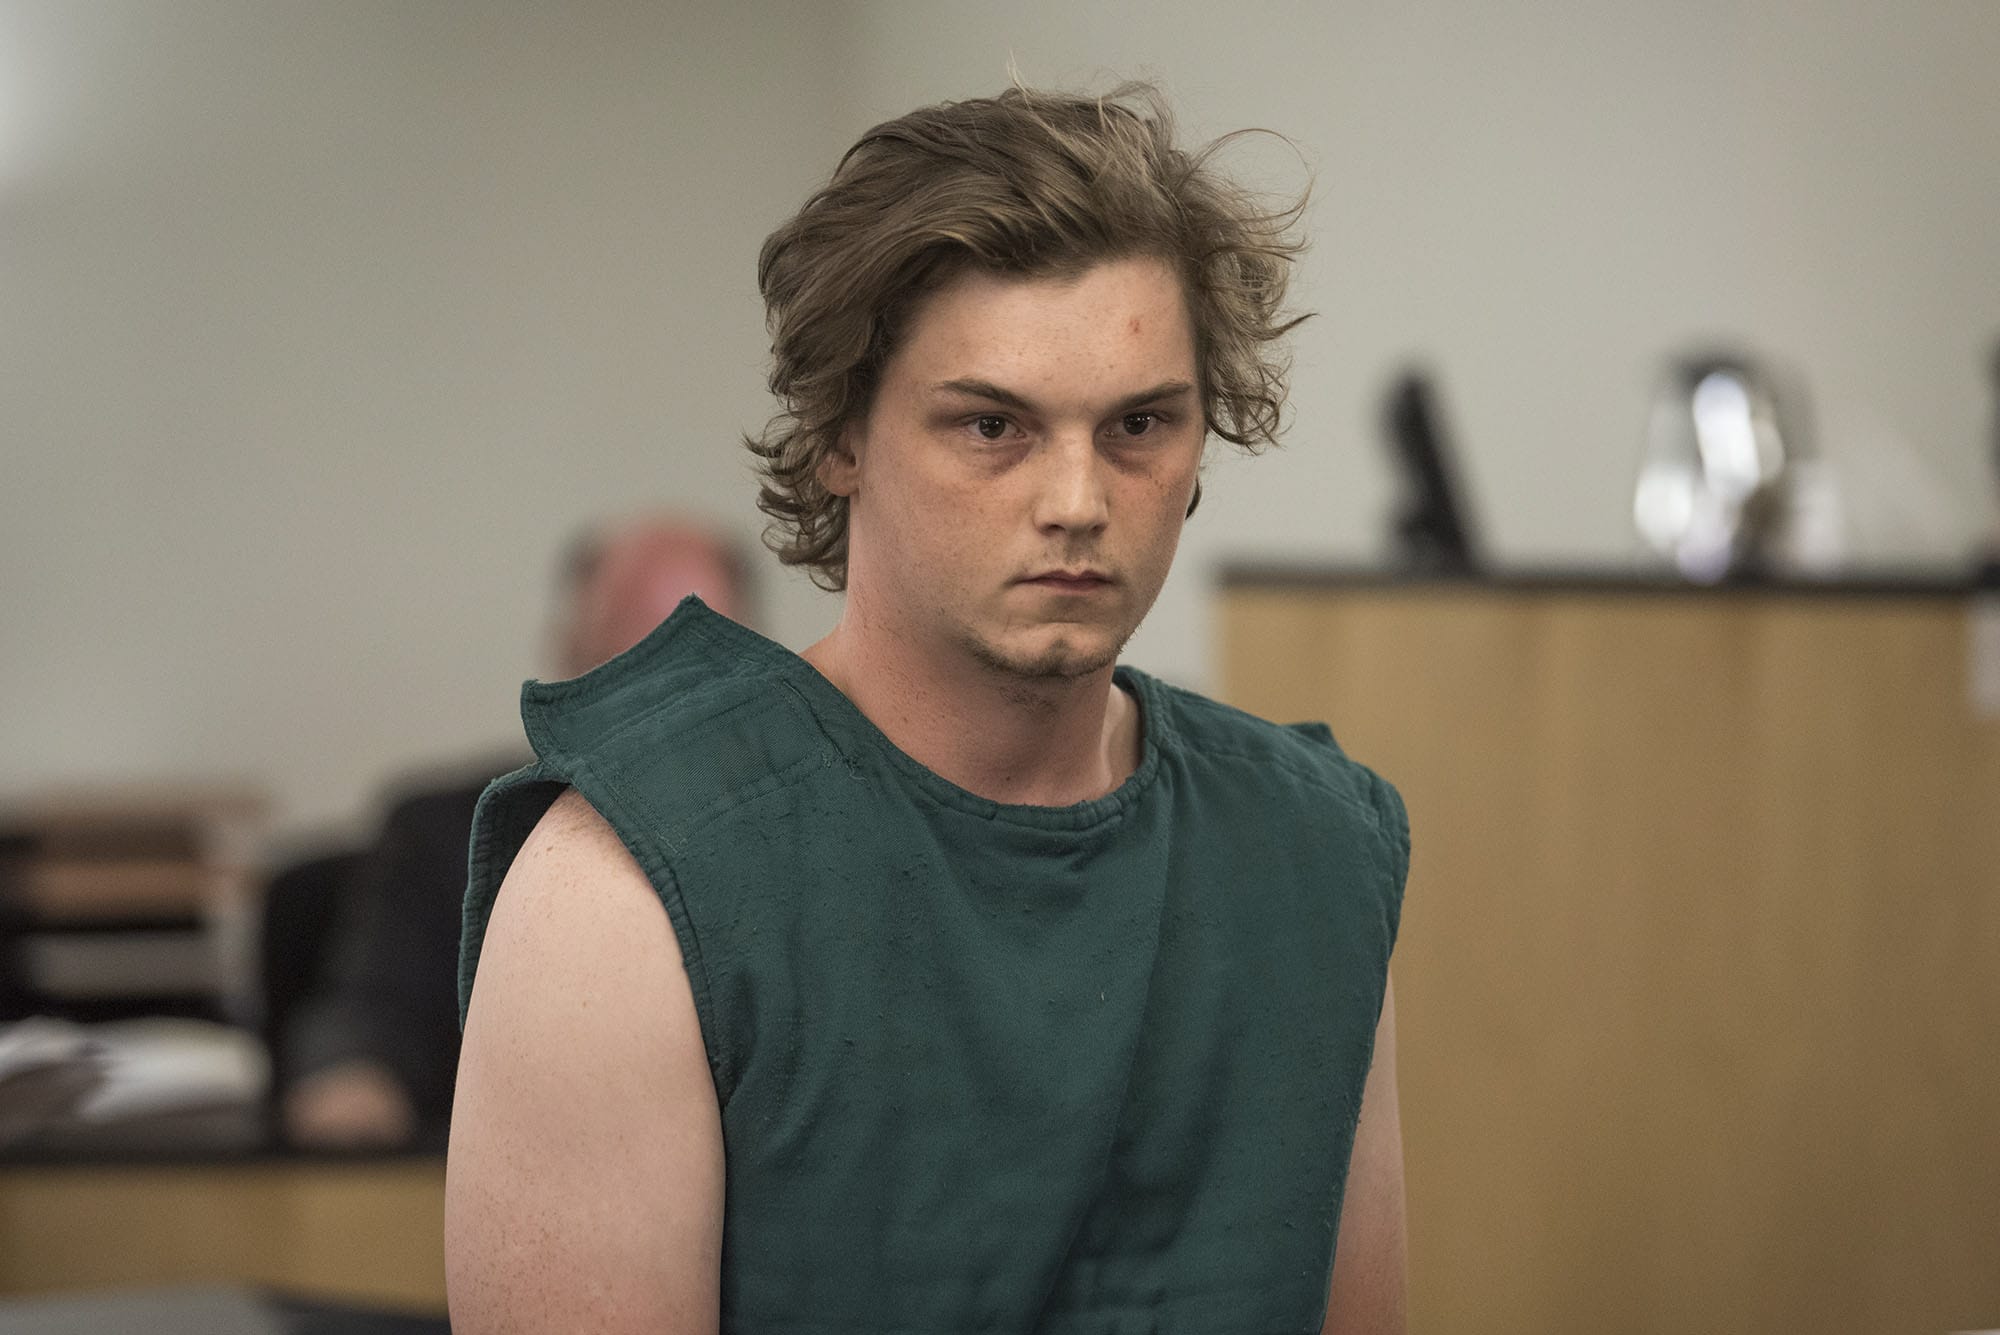 Damian J. Knox appears Friday in Clark County Superior Court after allegedly firing shots from his vehicle during a road rage-type incident Thursday in Battle Ground.